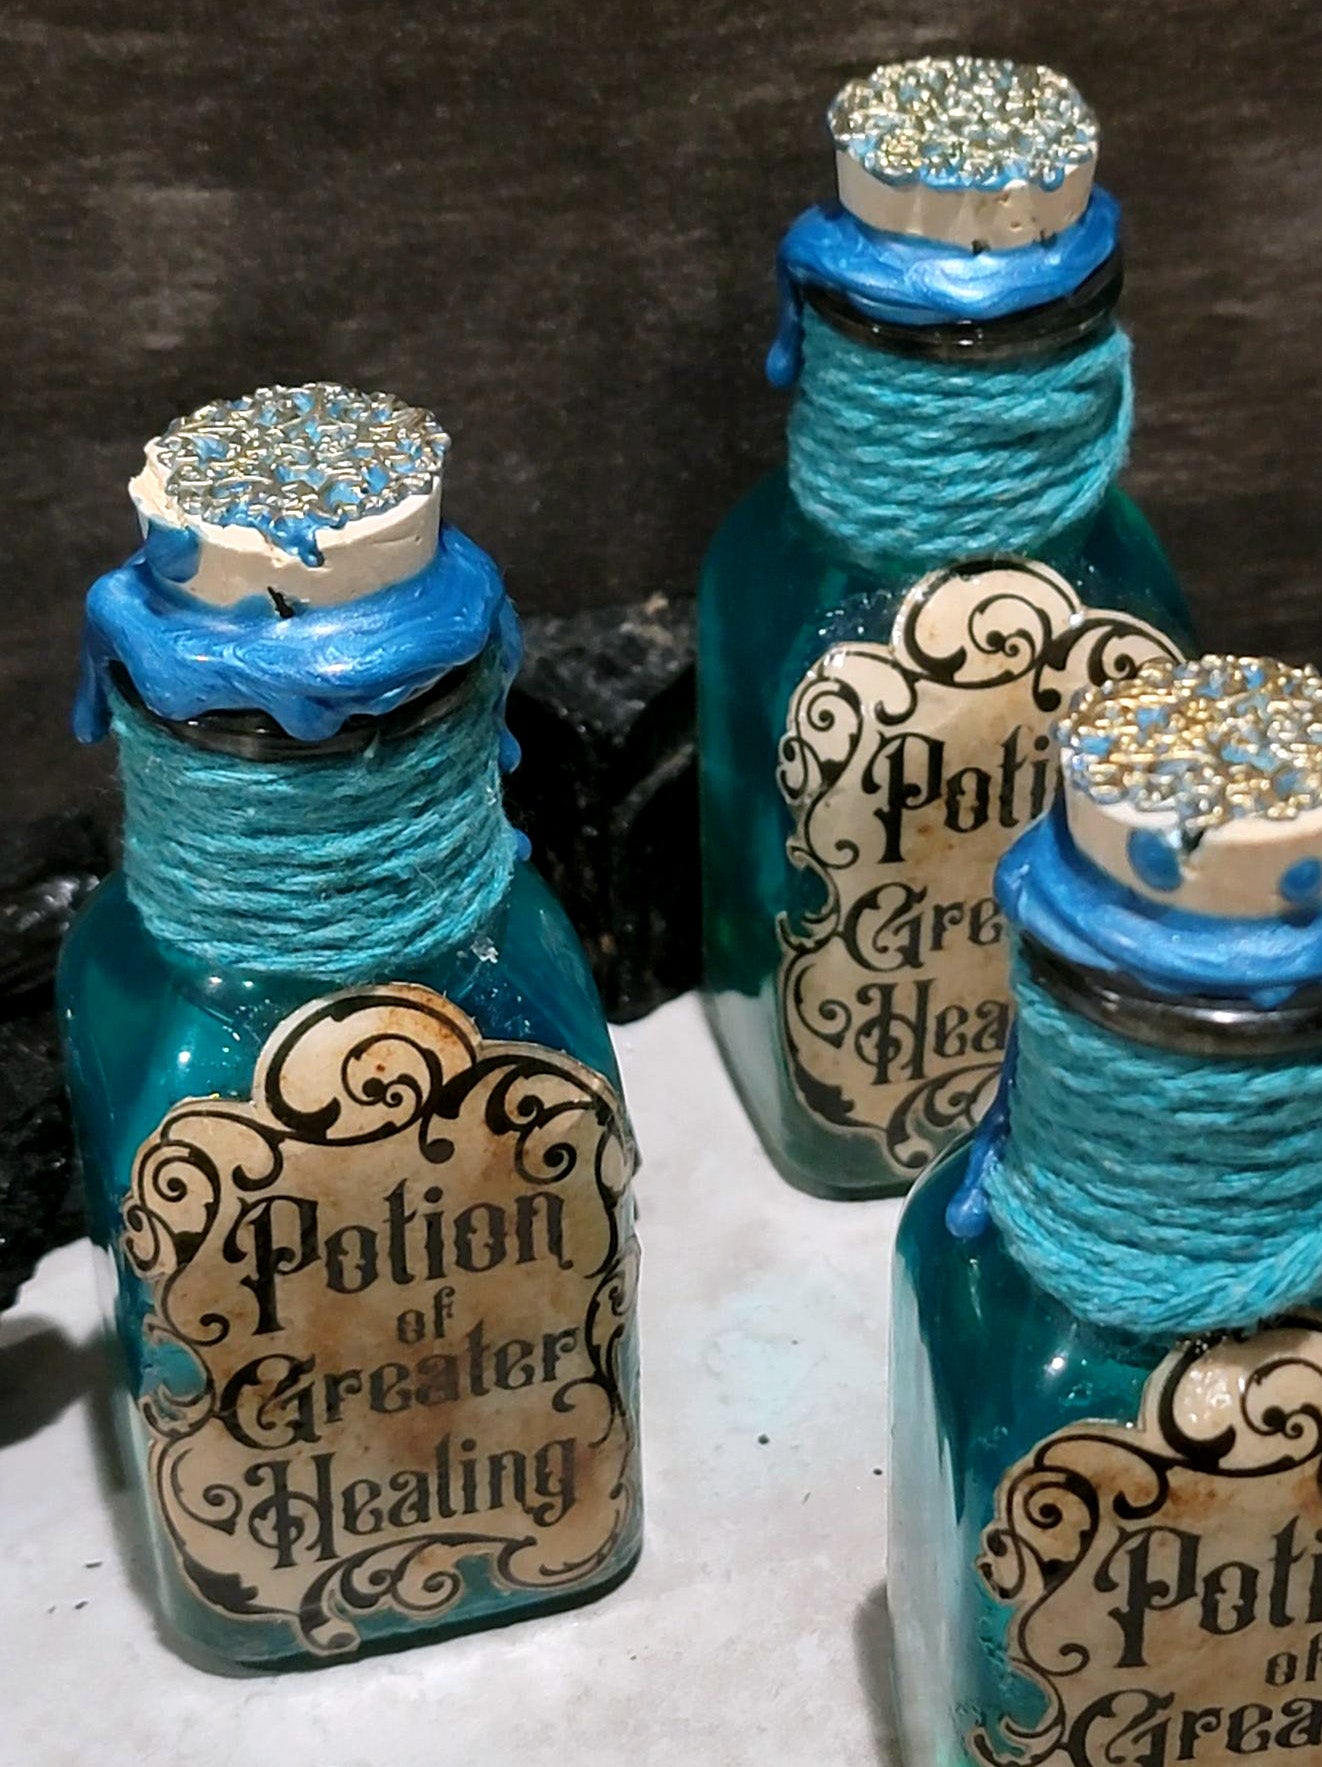 Potion of Greater Healing Small | Apothecary Potion | Potion decoration | DND Prop |